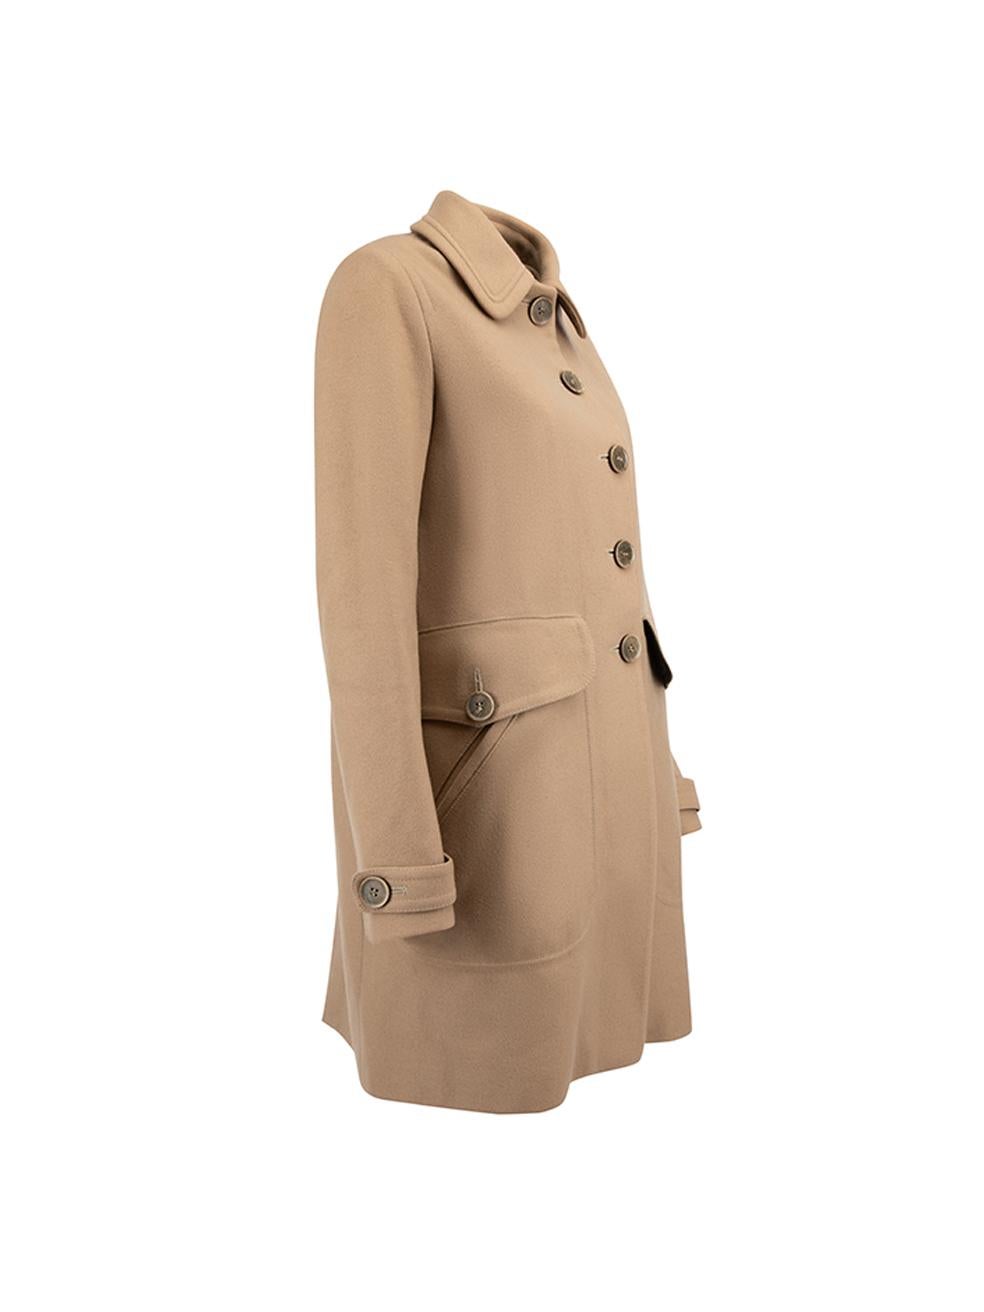 CONDITION is Very good. Minimal wear to coat is evident. Minimal wear to the outer fabric and there is a small stain to the front of the collar on the underside of this used Thomas Burberry designer resale item. 



Details


Beige

Wool

Mid length